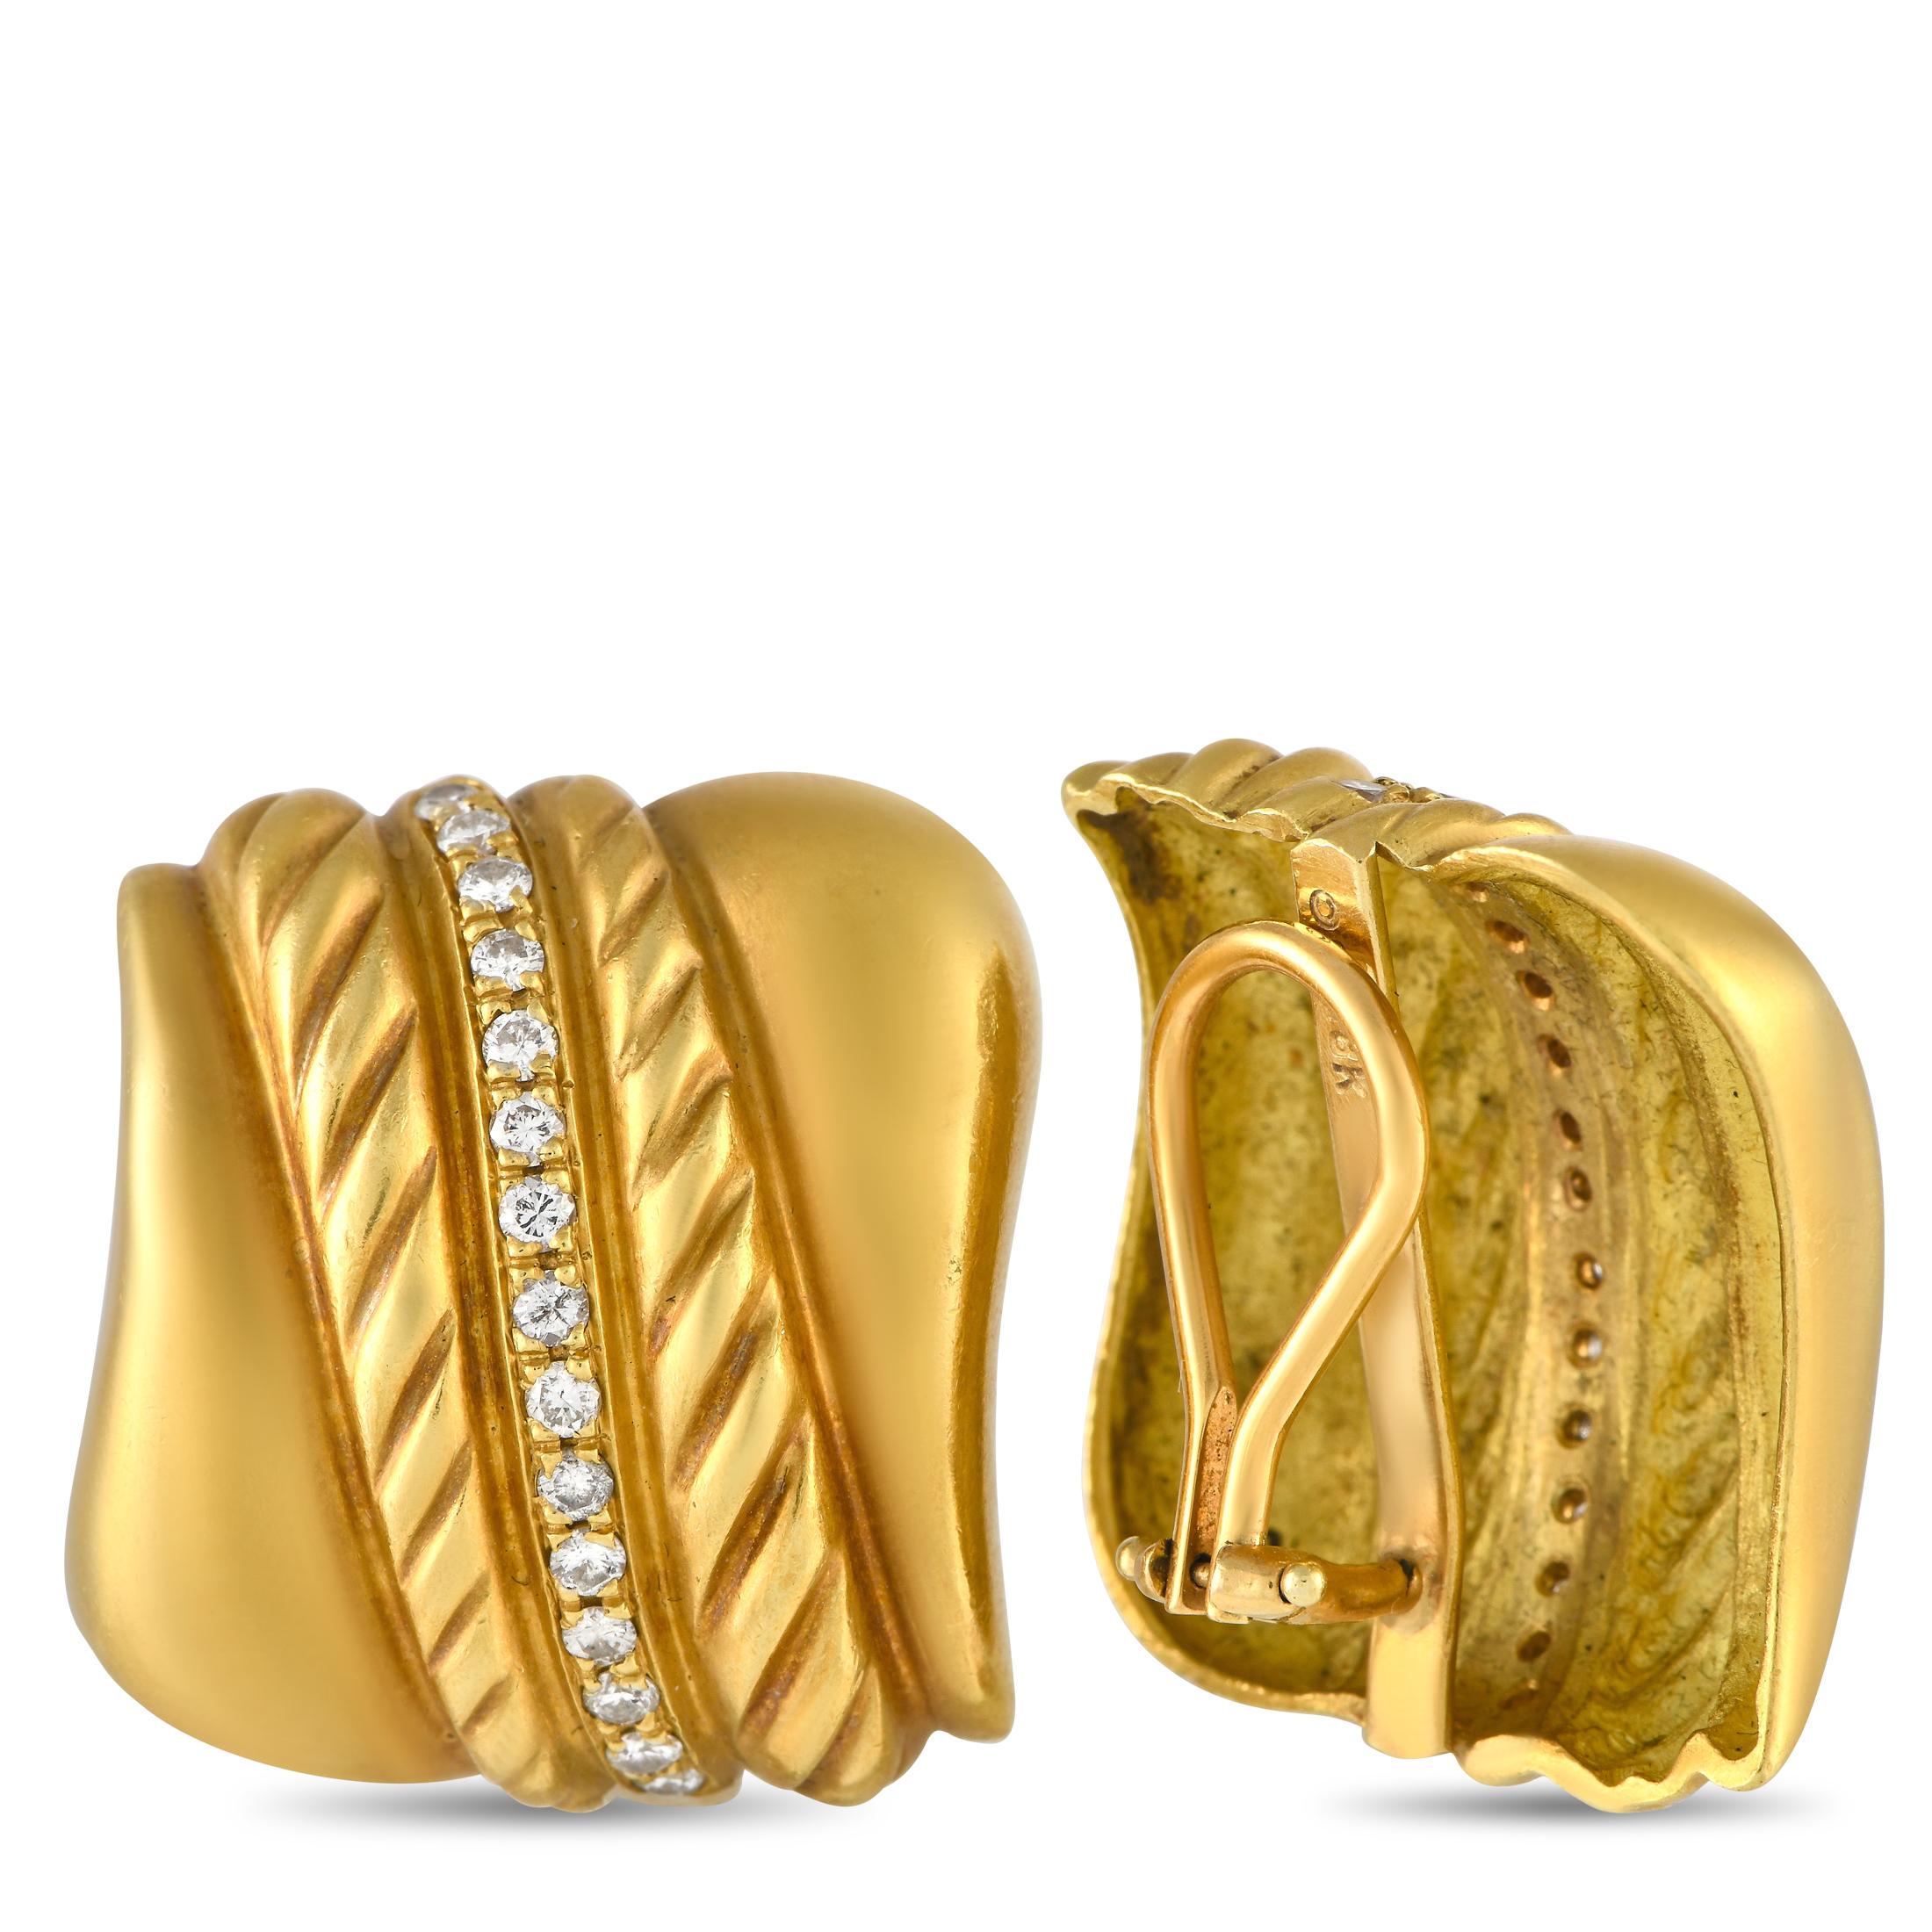 These bold 18K Yellow Gold Seiden Gang earrings are designed to make a statement. Each one of these incredibly eye-catching earrings measures 1.0 long by 0.75 wide. Diamond accents with a total weight of 0.45 carats make them even more exciting.This